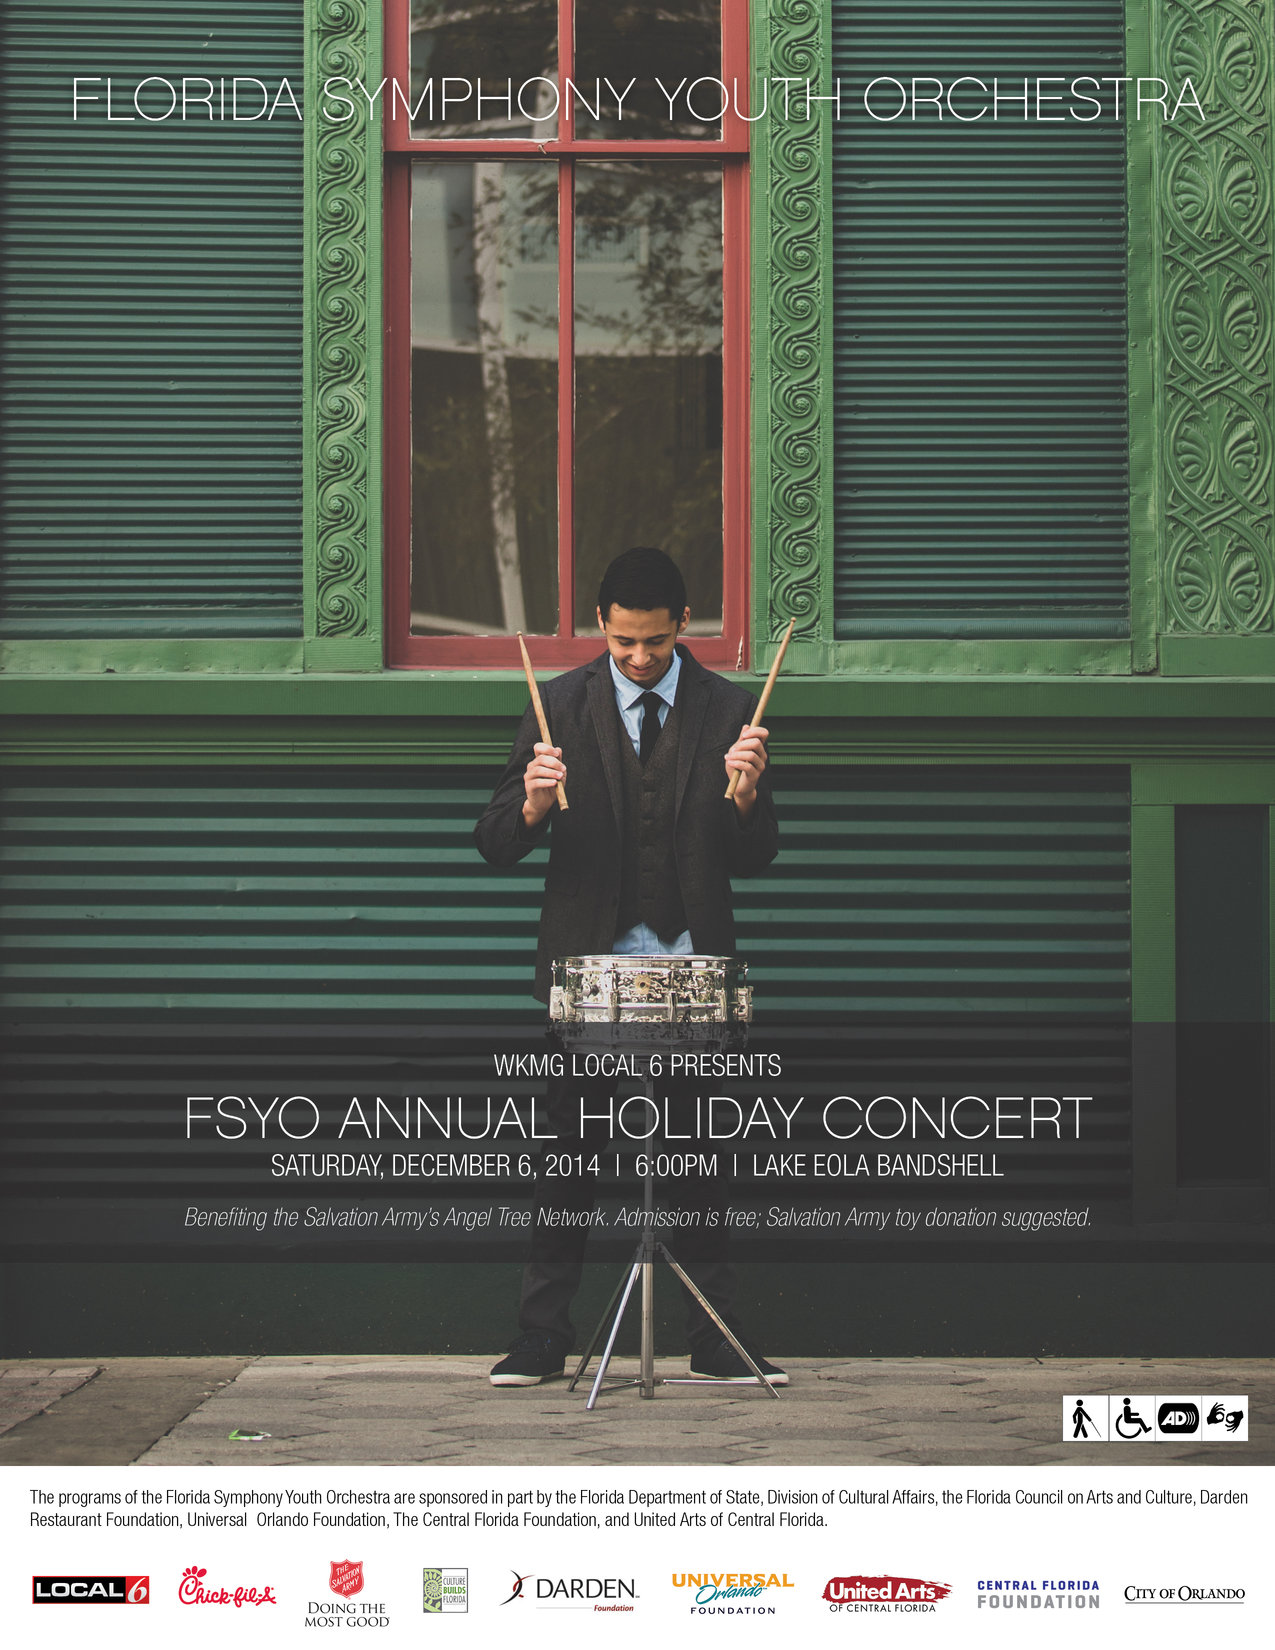 rsz 12014-15 fsyo concert posters holiday concert